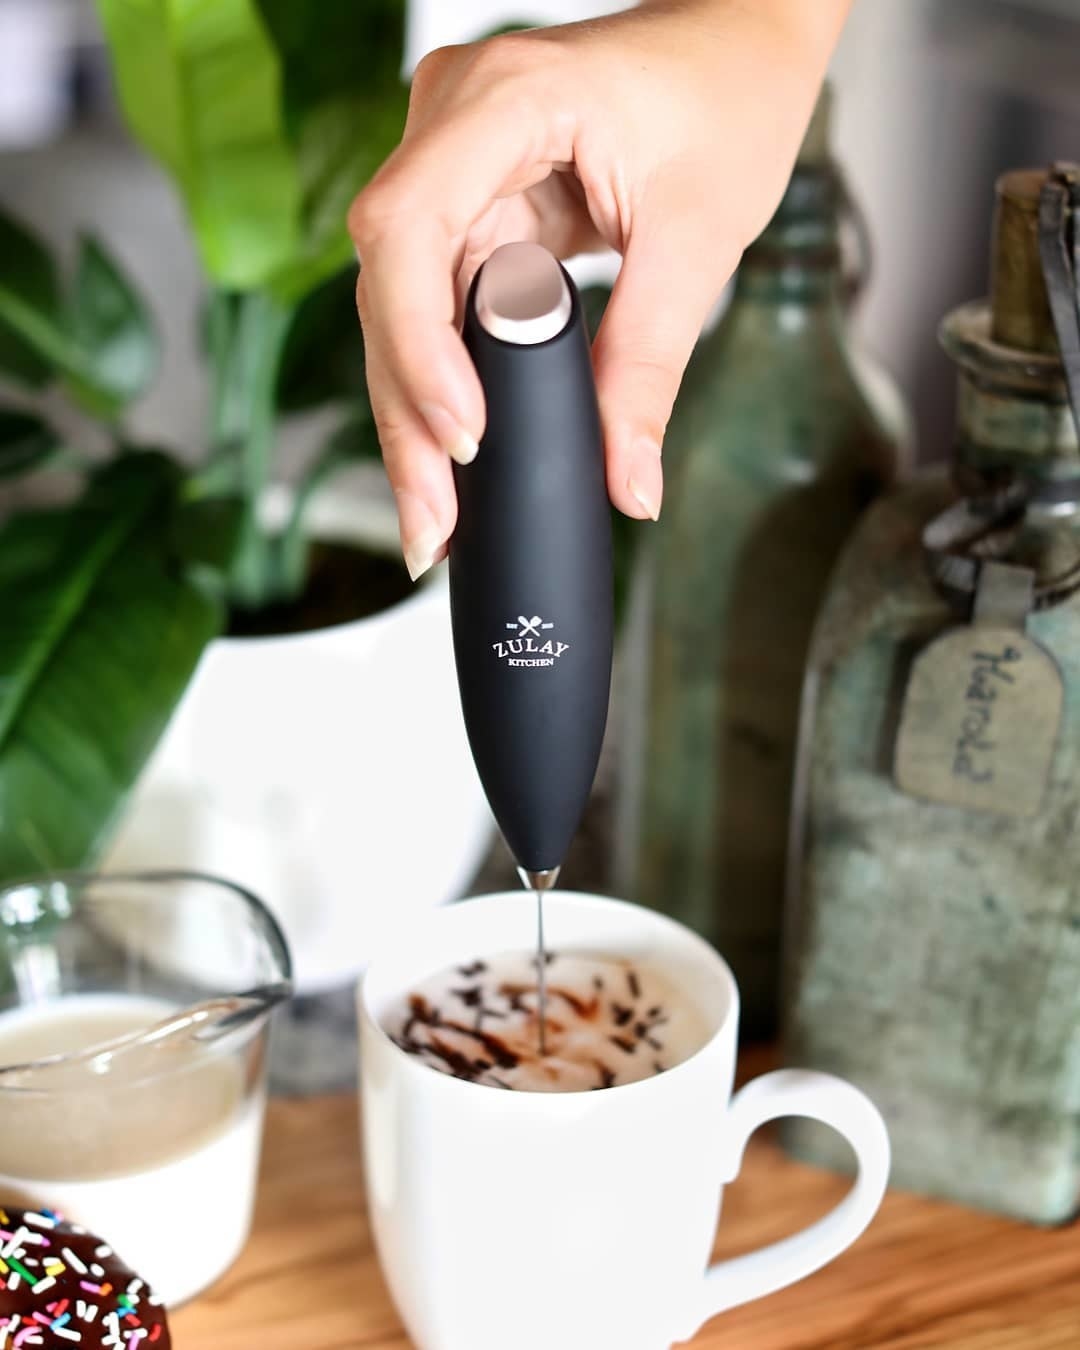 A person using the frother in their coffee